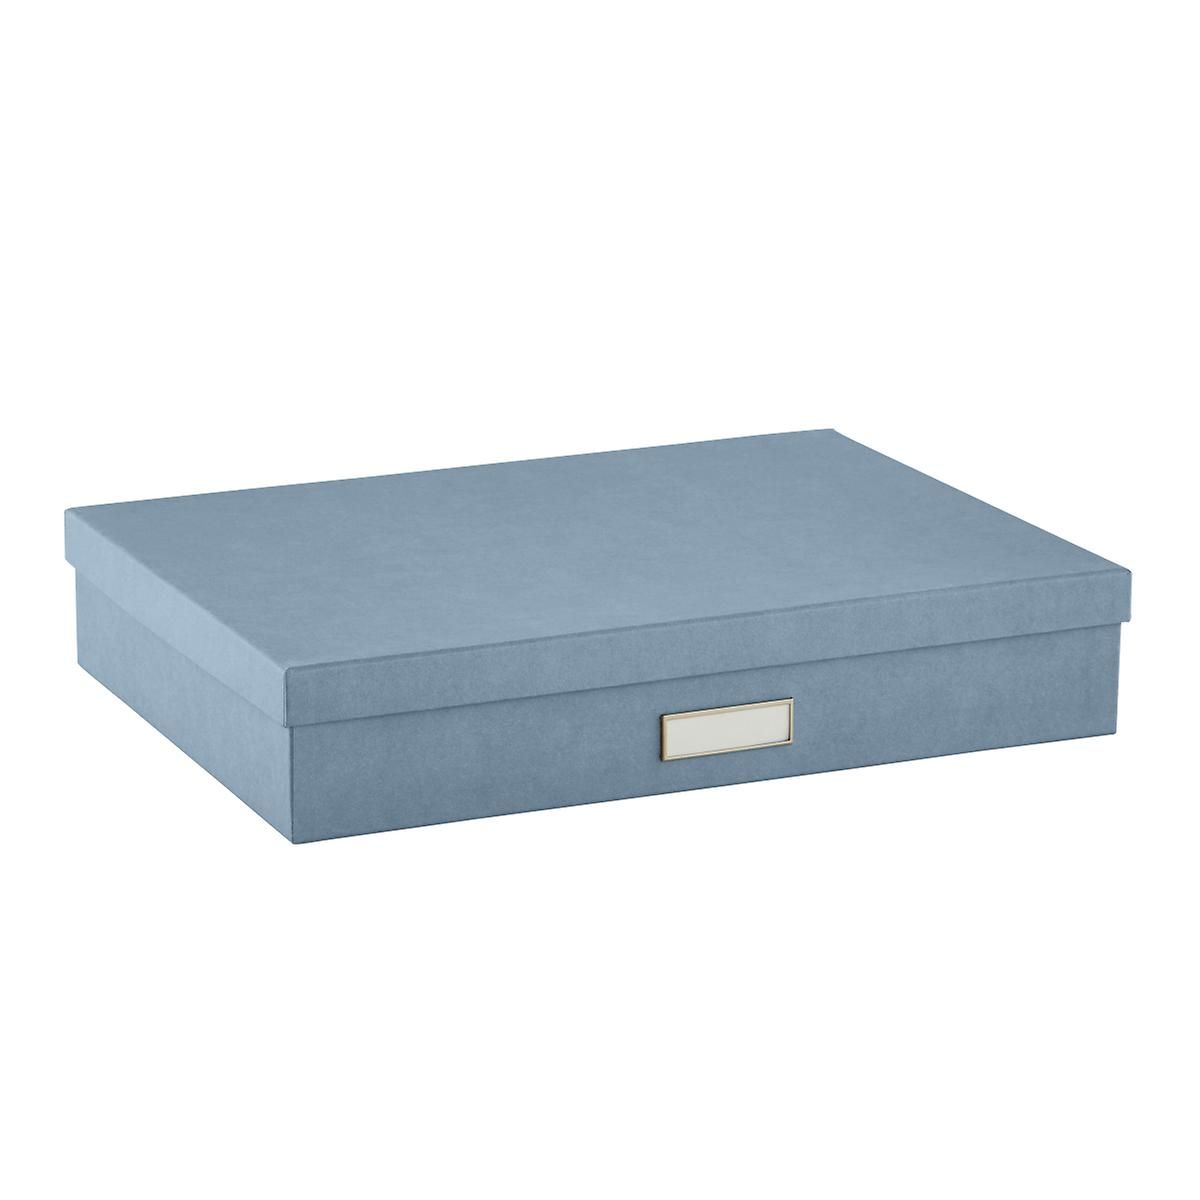 Bigso Steel Blue Stockholm Office Storage Boxes | The Container Store